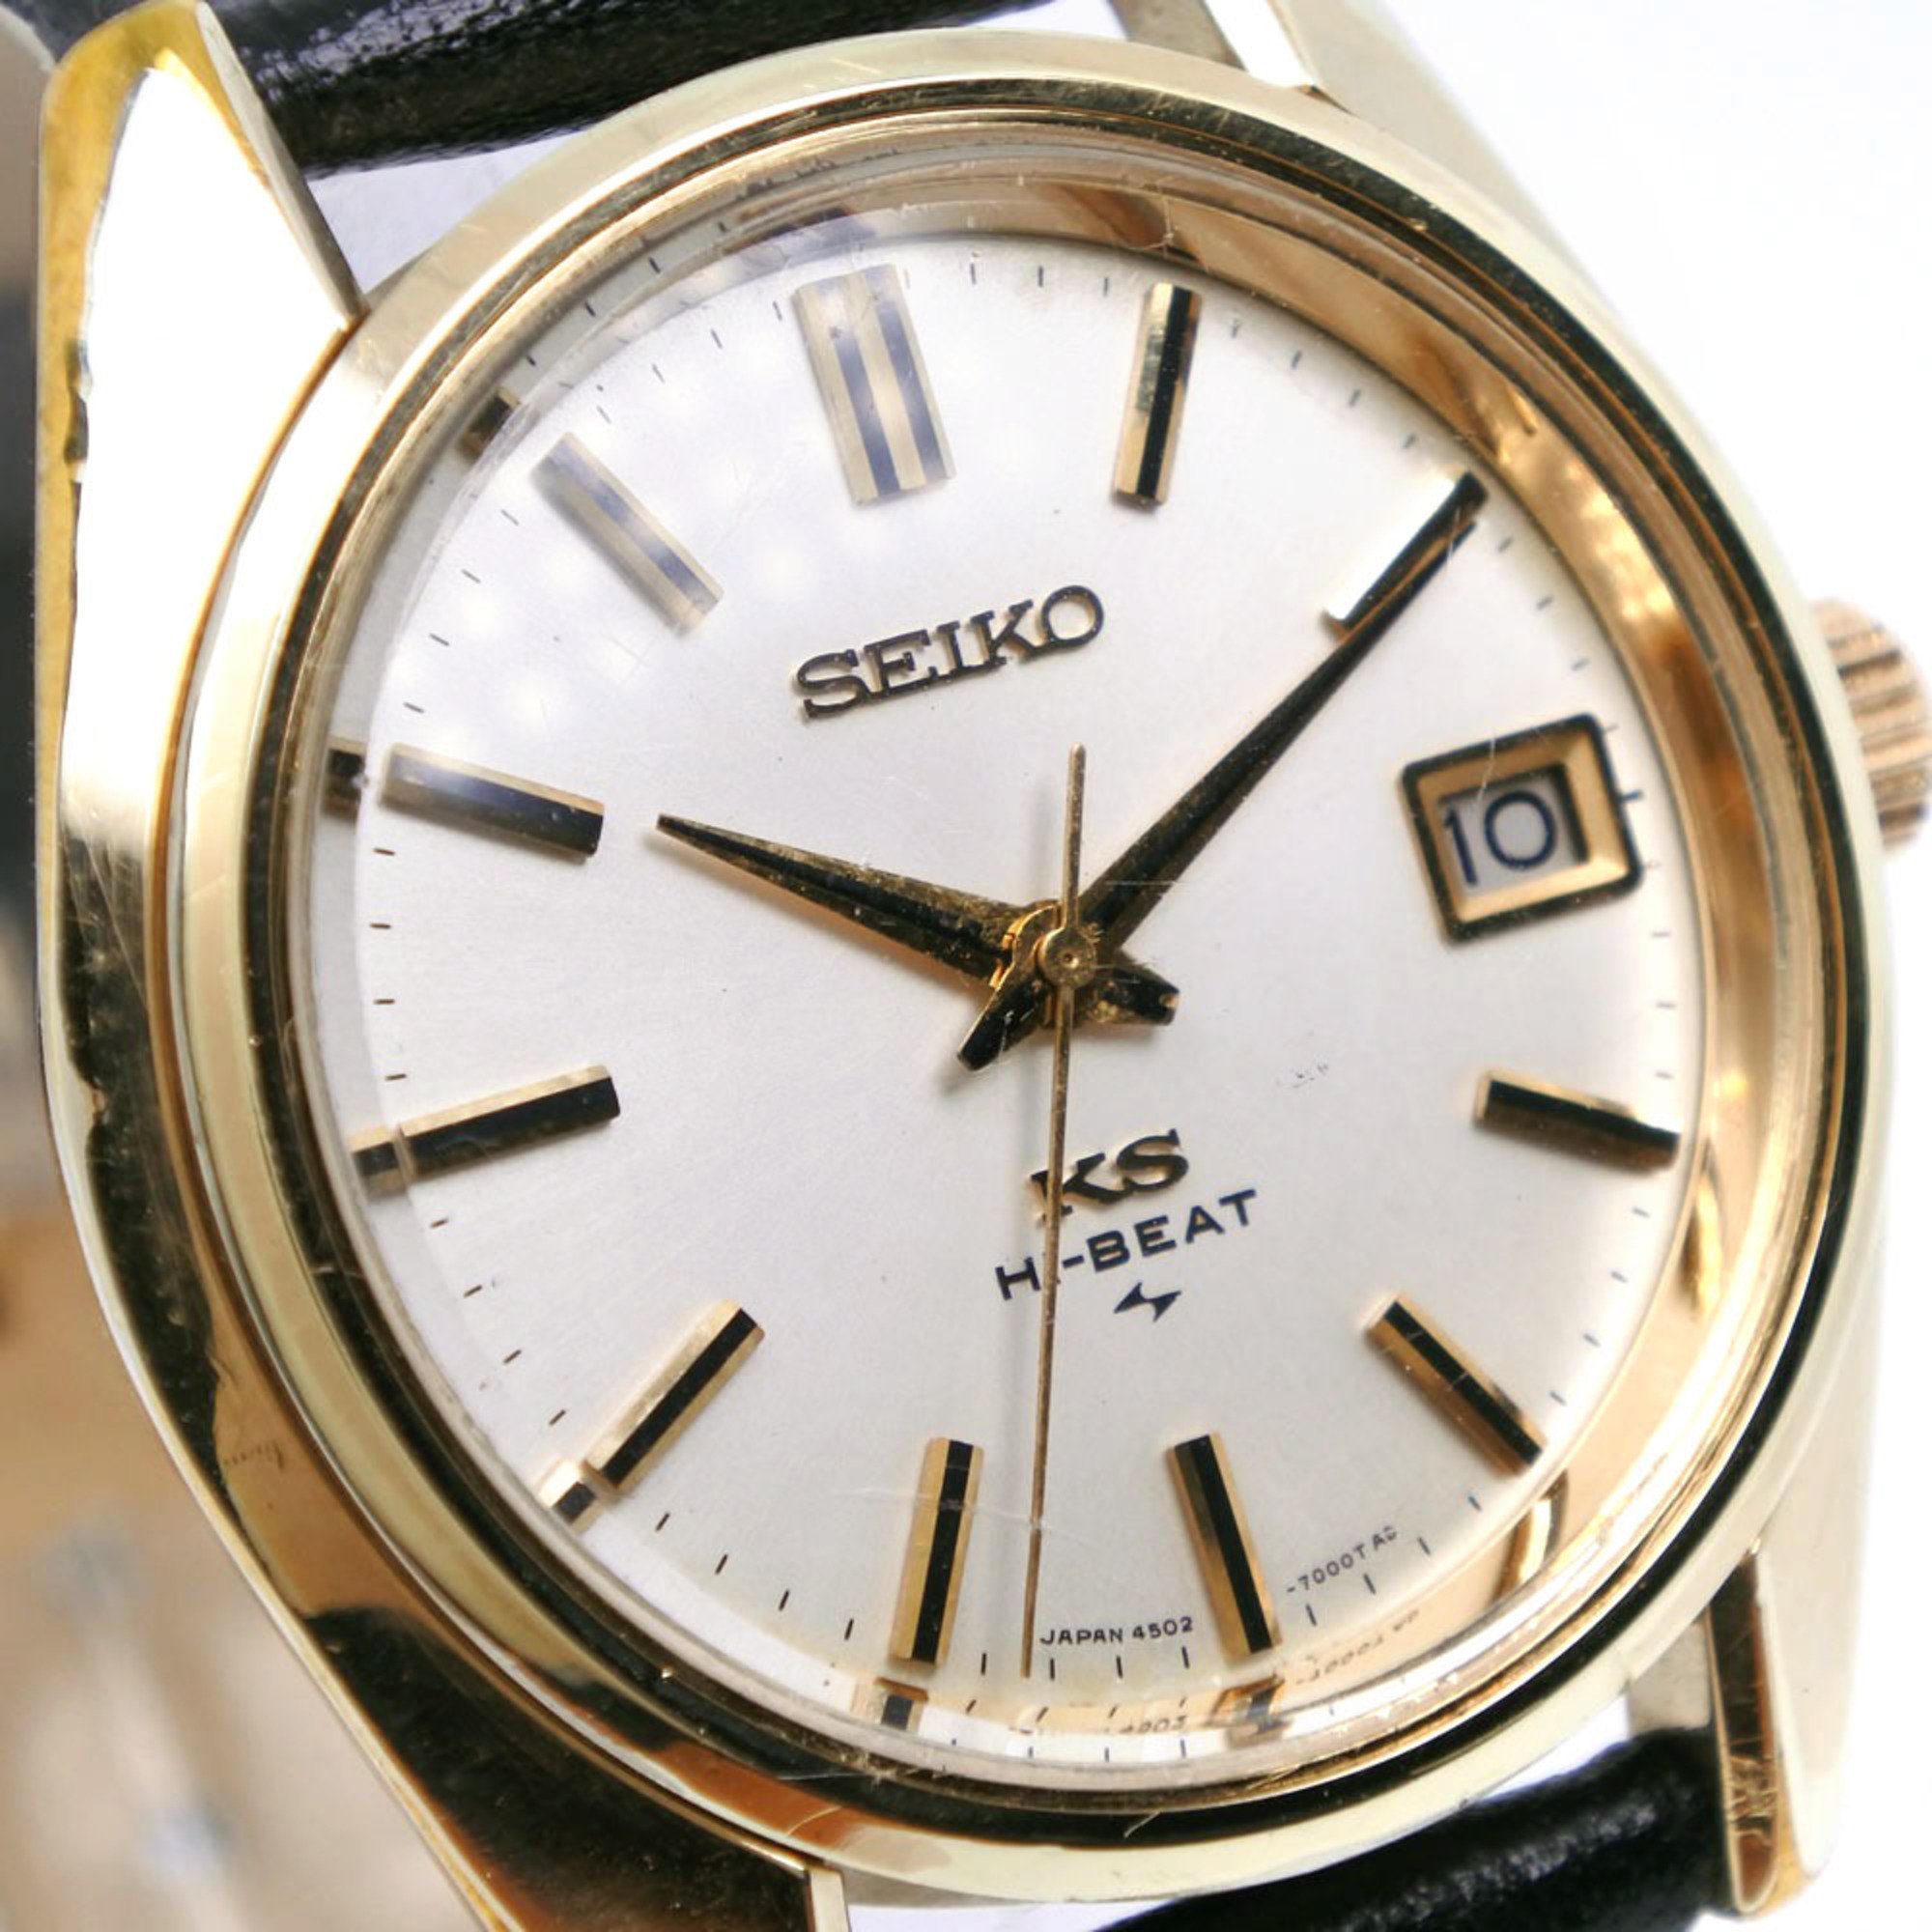 Seiko SEIKO King Watch 4502-7001 Stainless Steel x Gold Plated Leather Made in Japan Black Manual Winding Silver Dial Ladies